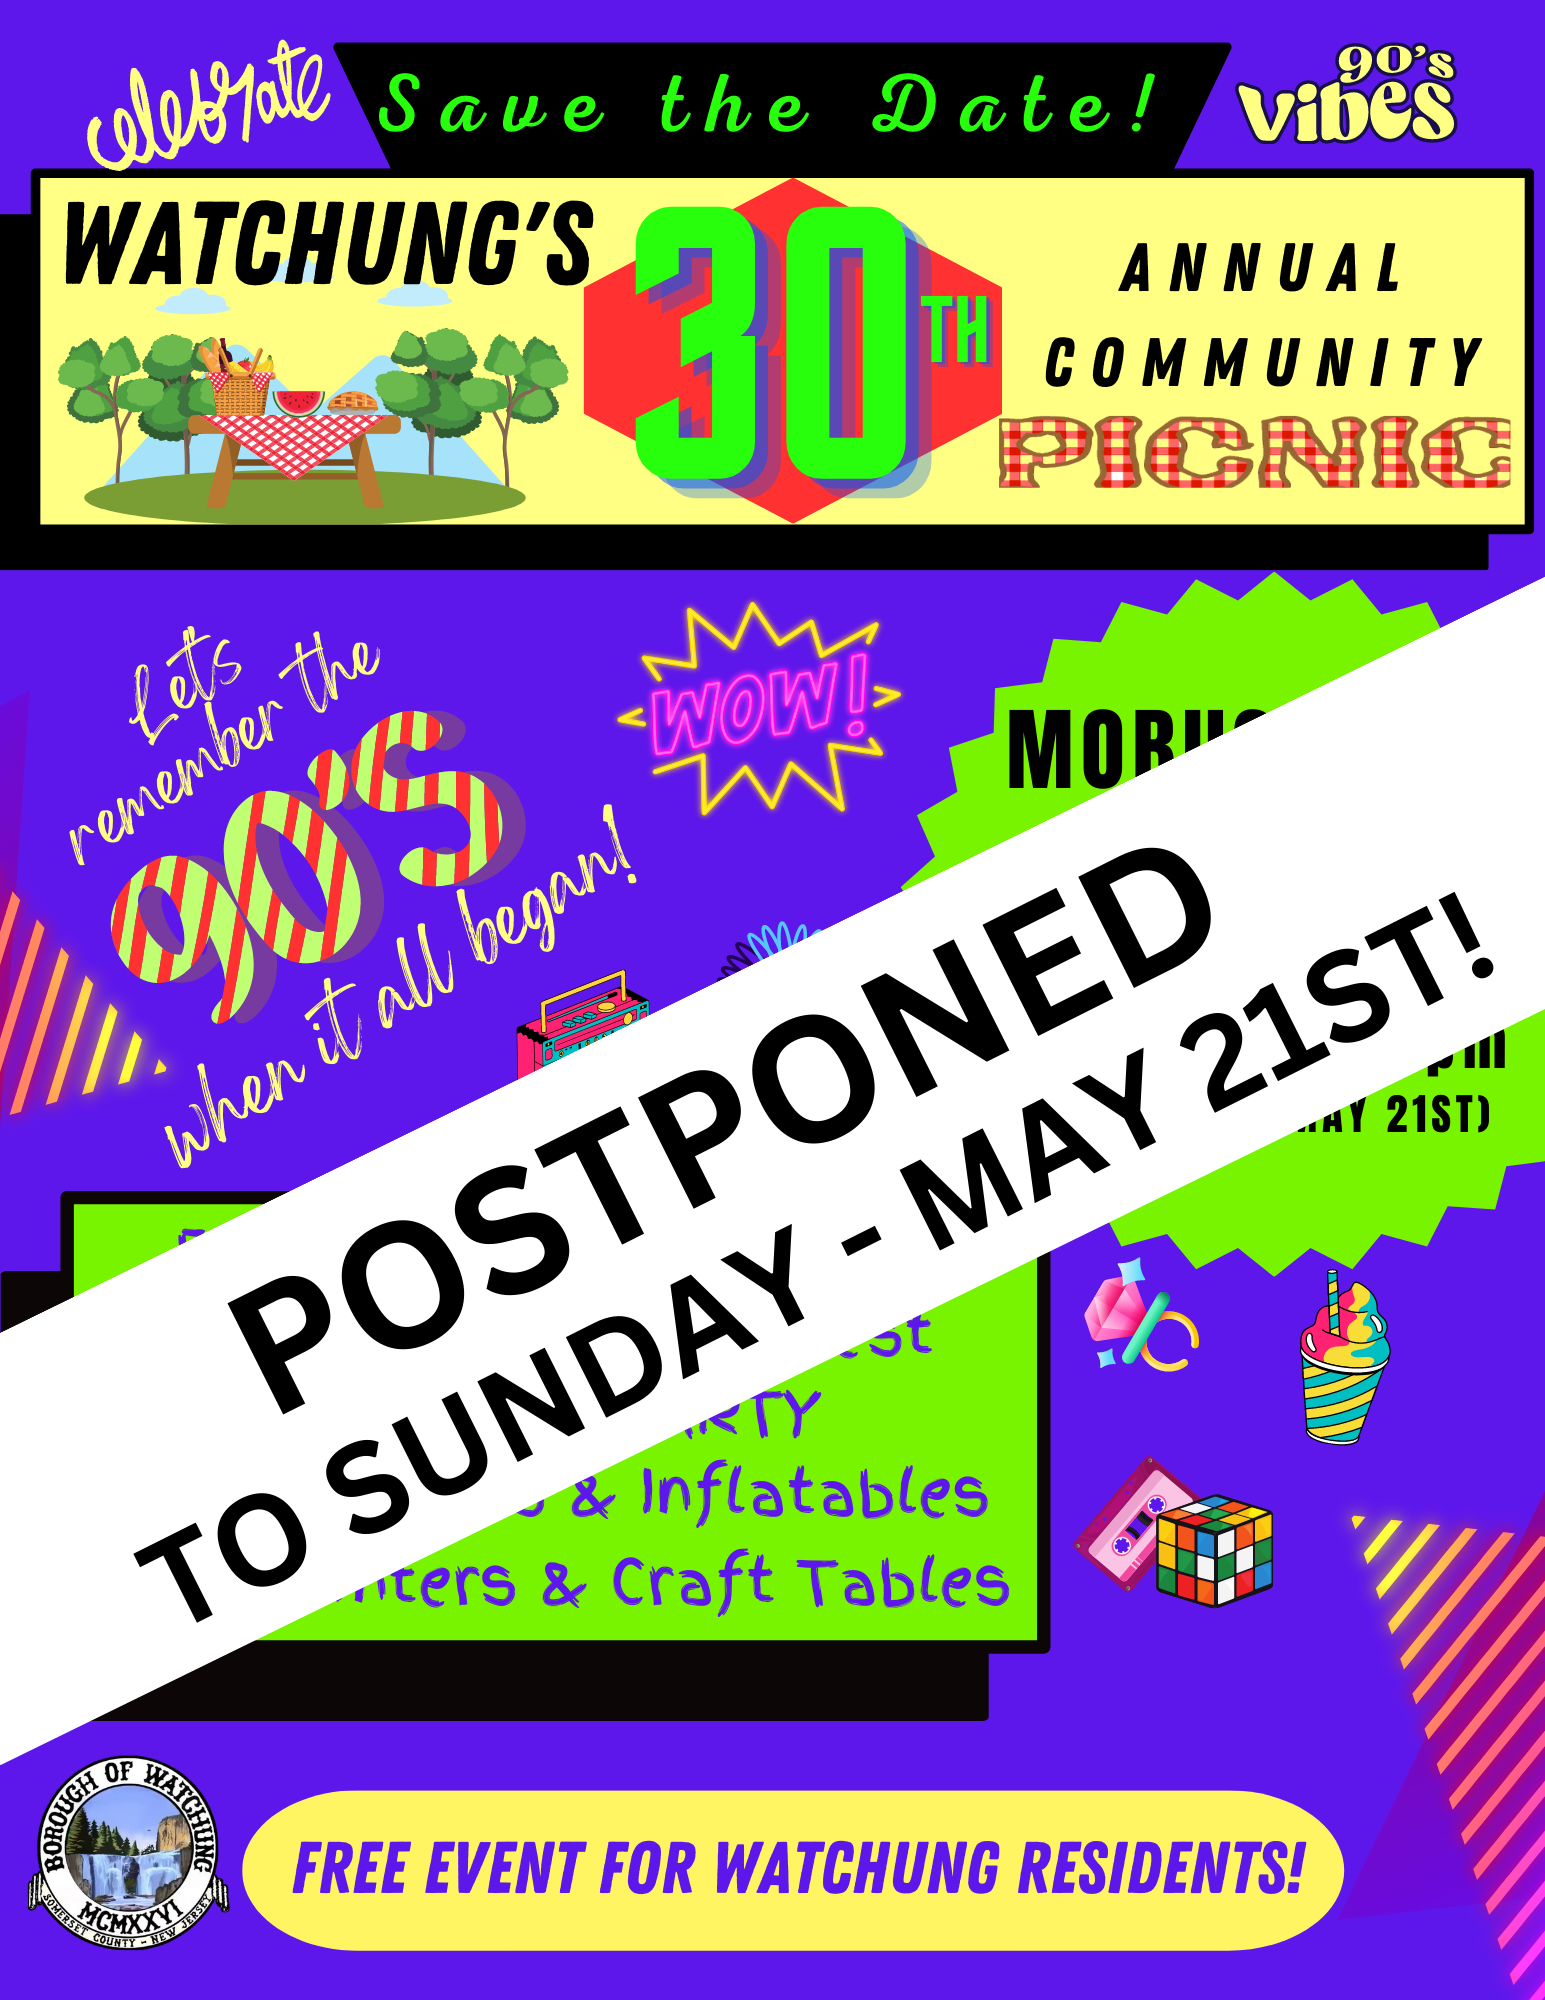 Click here for PDF for the Postponed Community Picnic